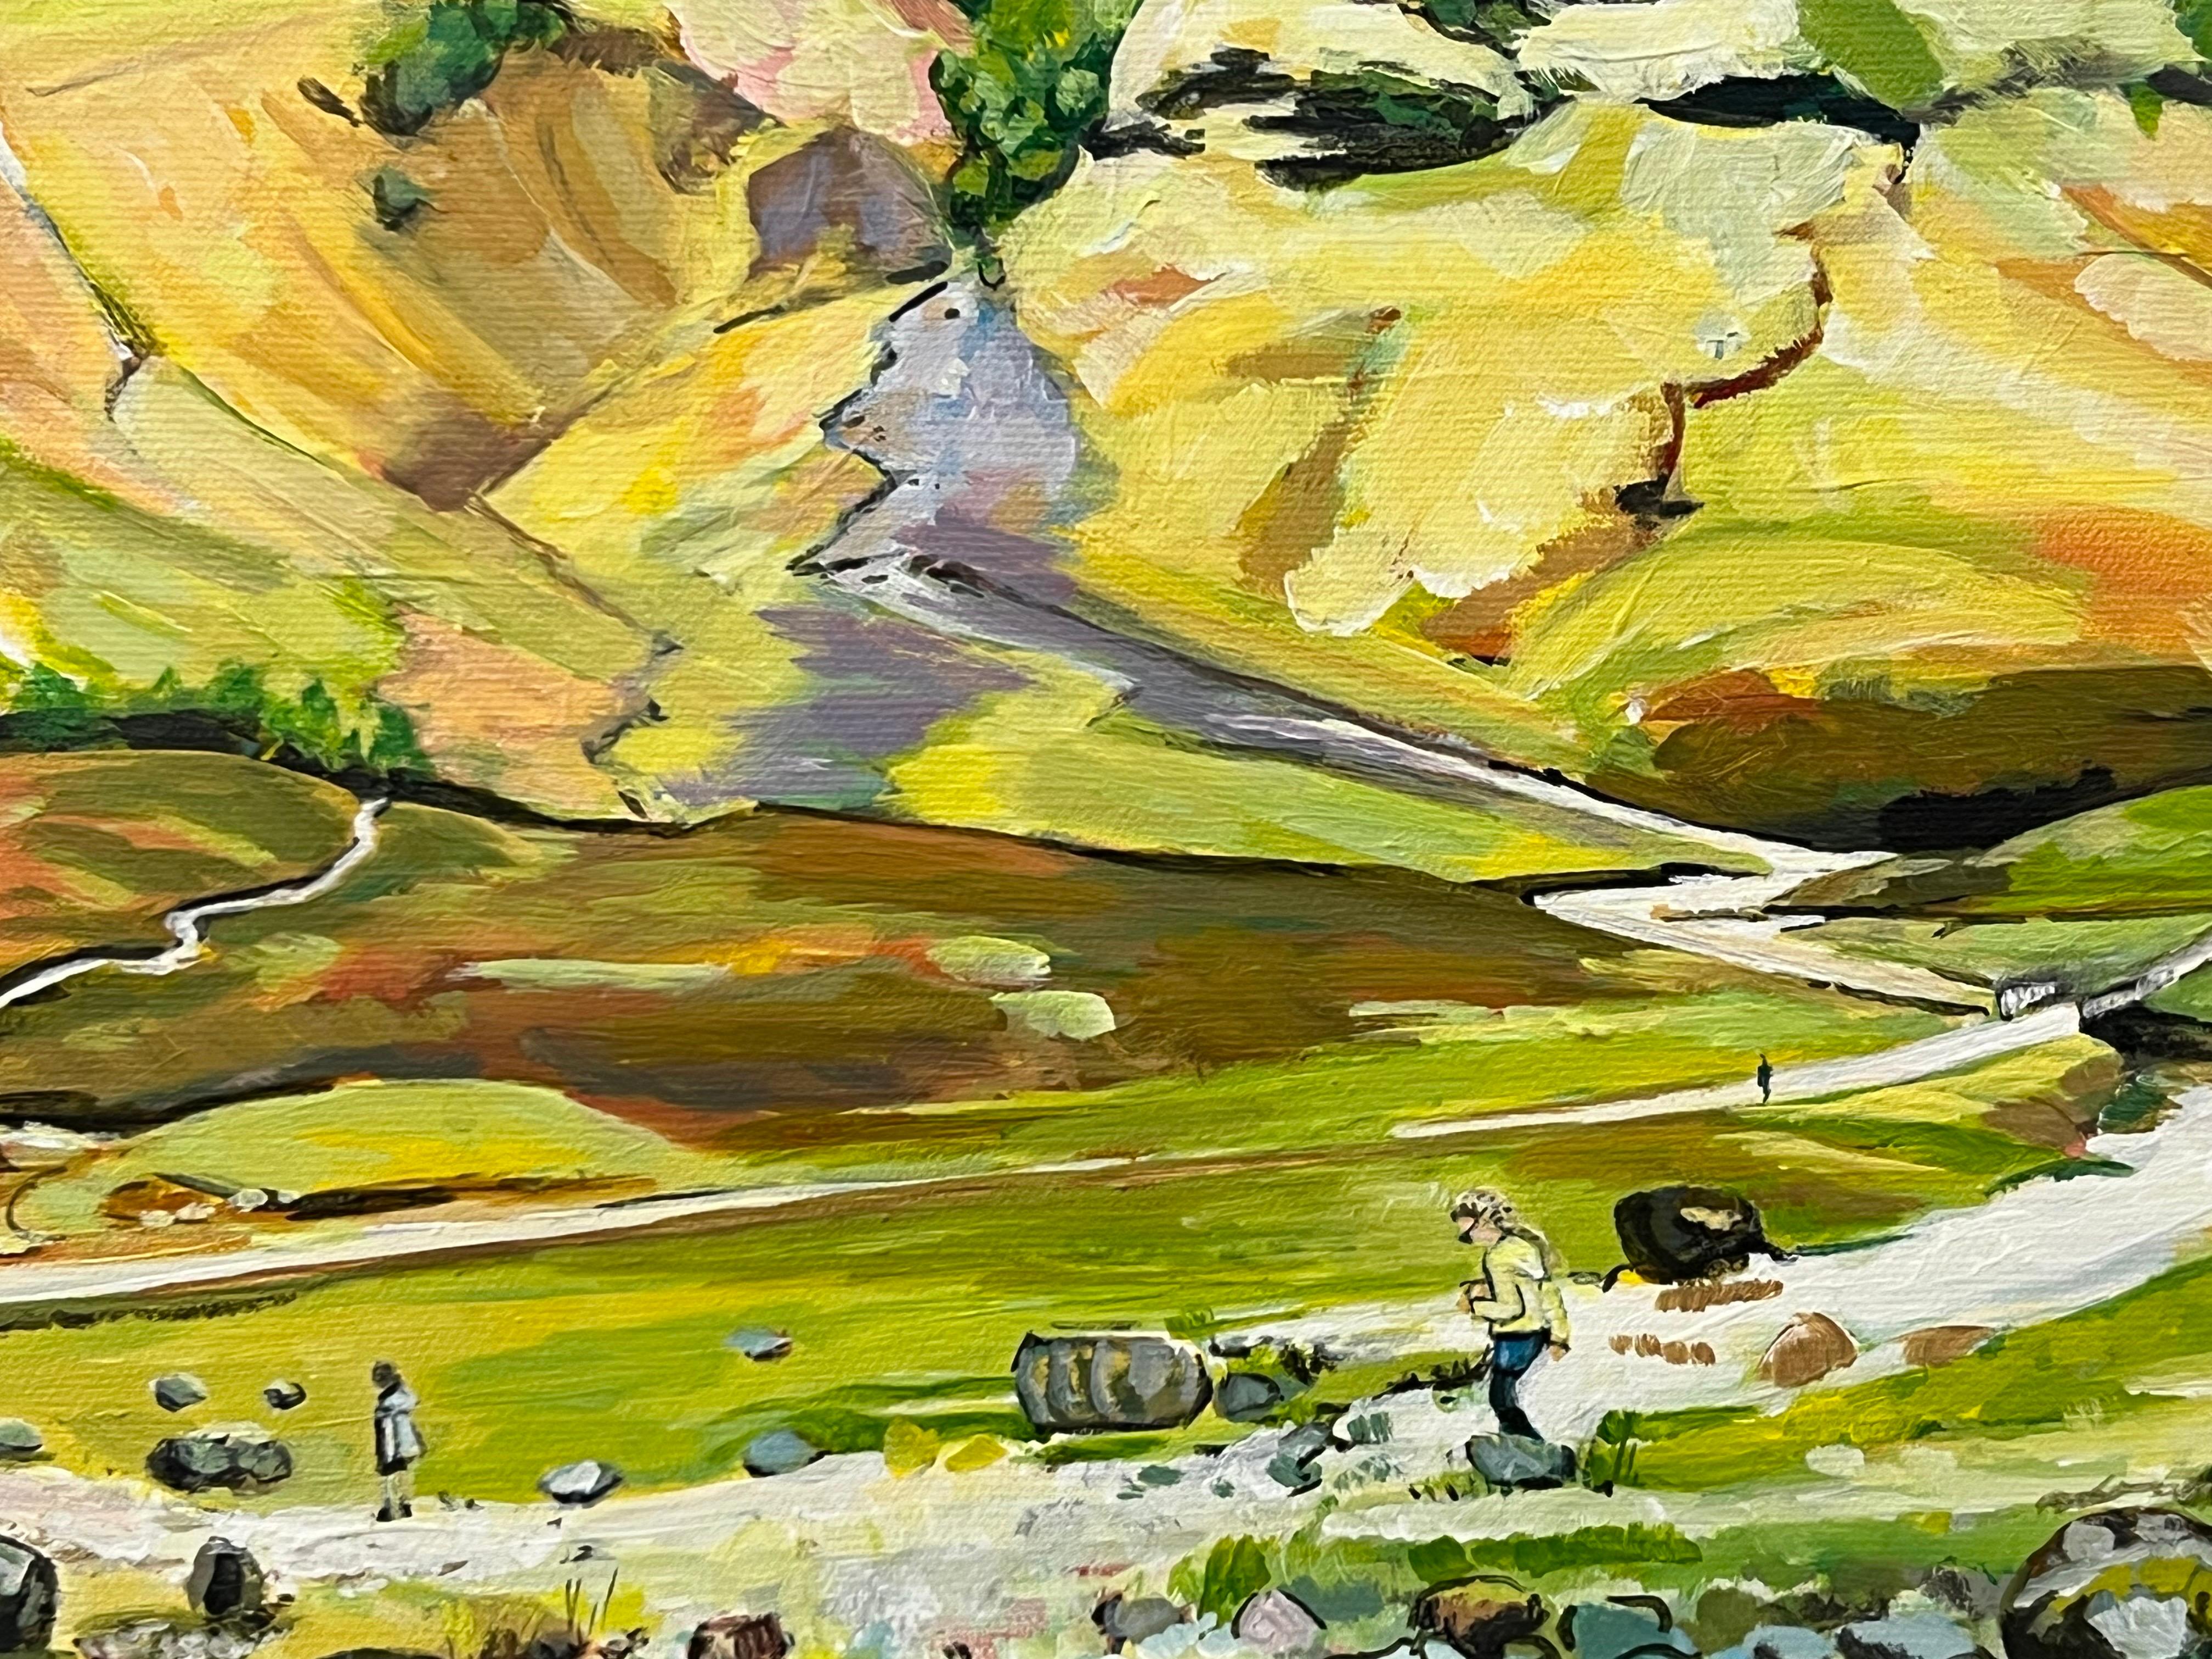 Scottish Highlands with Children Playing in the Mountains by Contemporary Artist For Sale 7